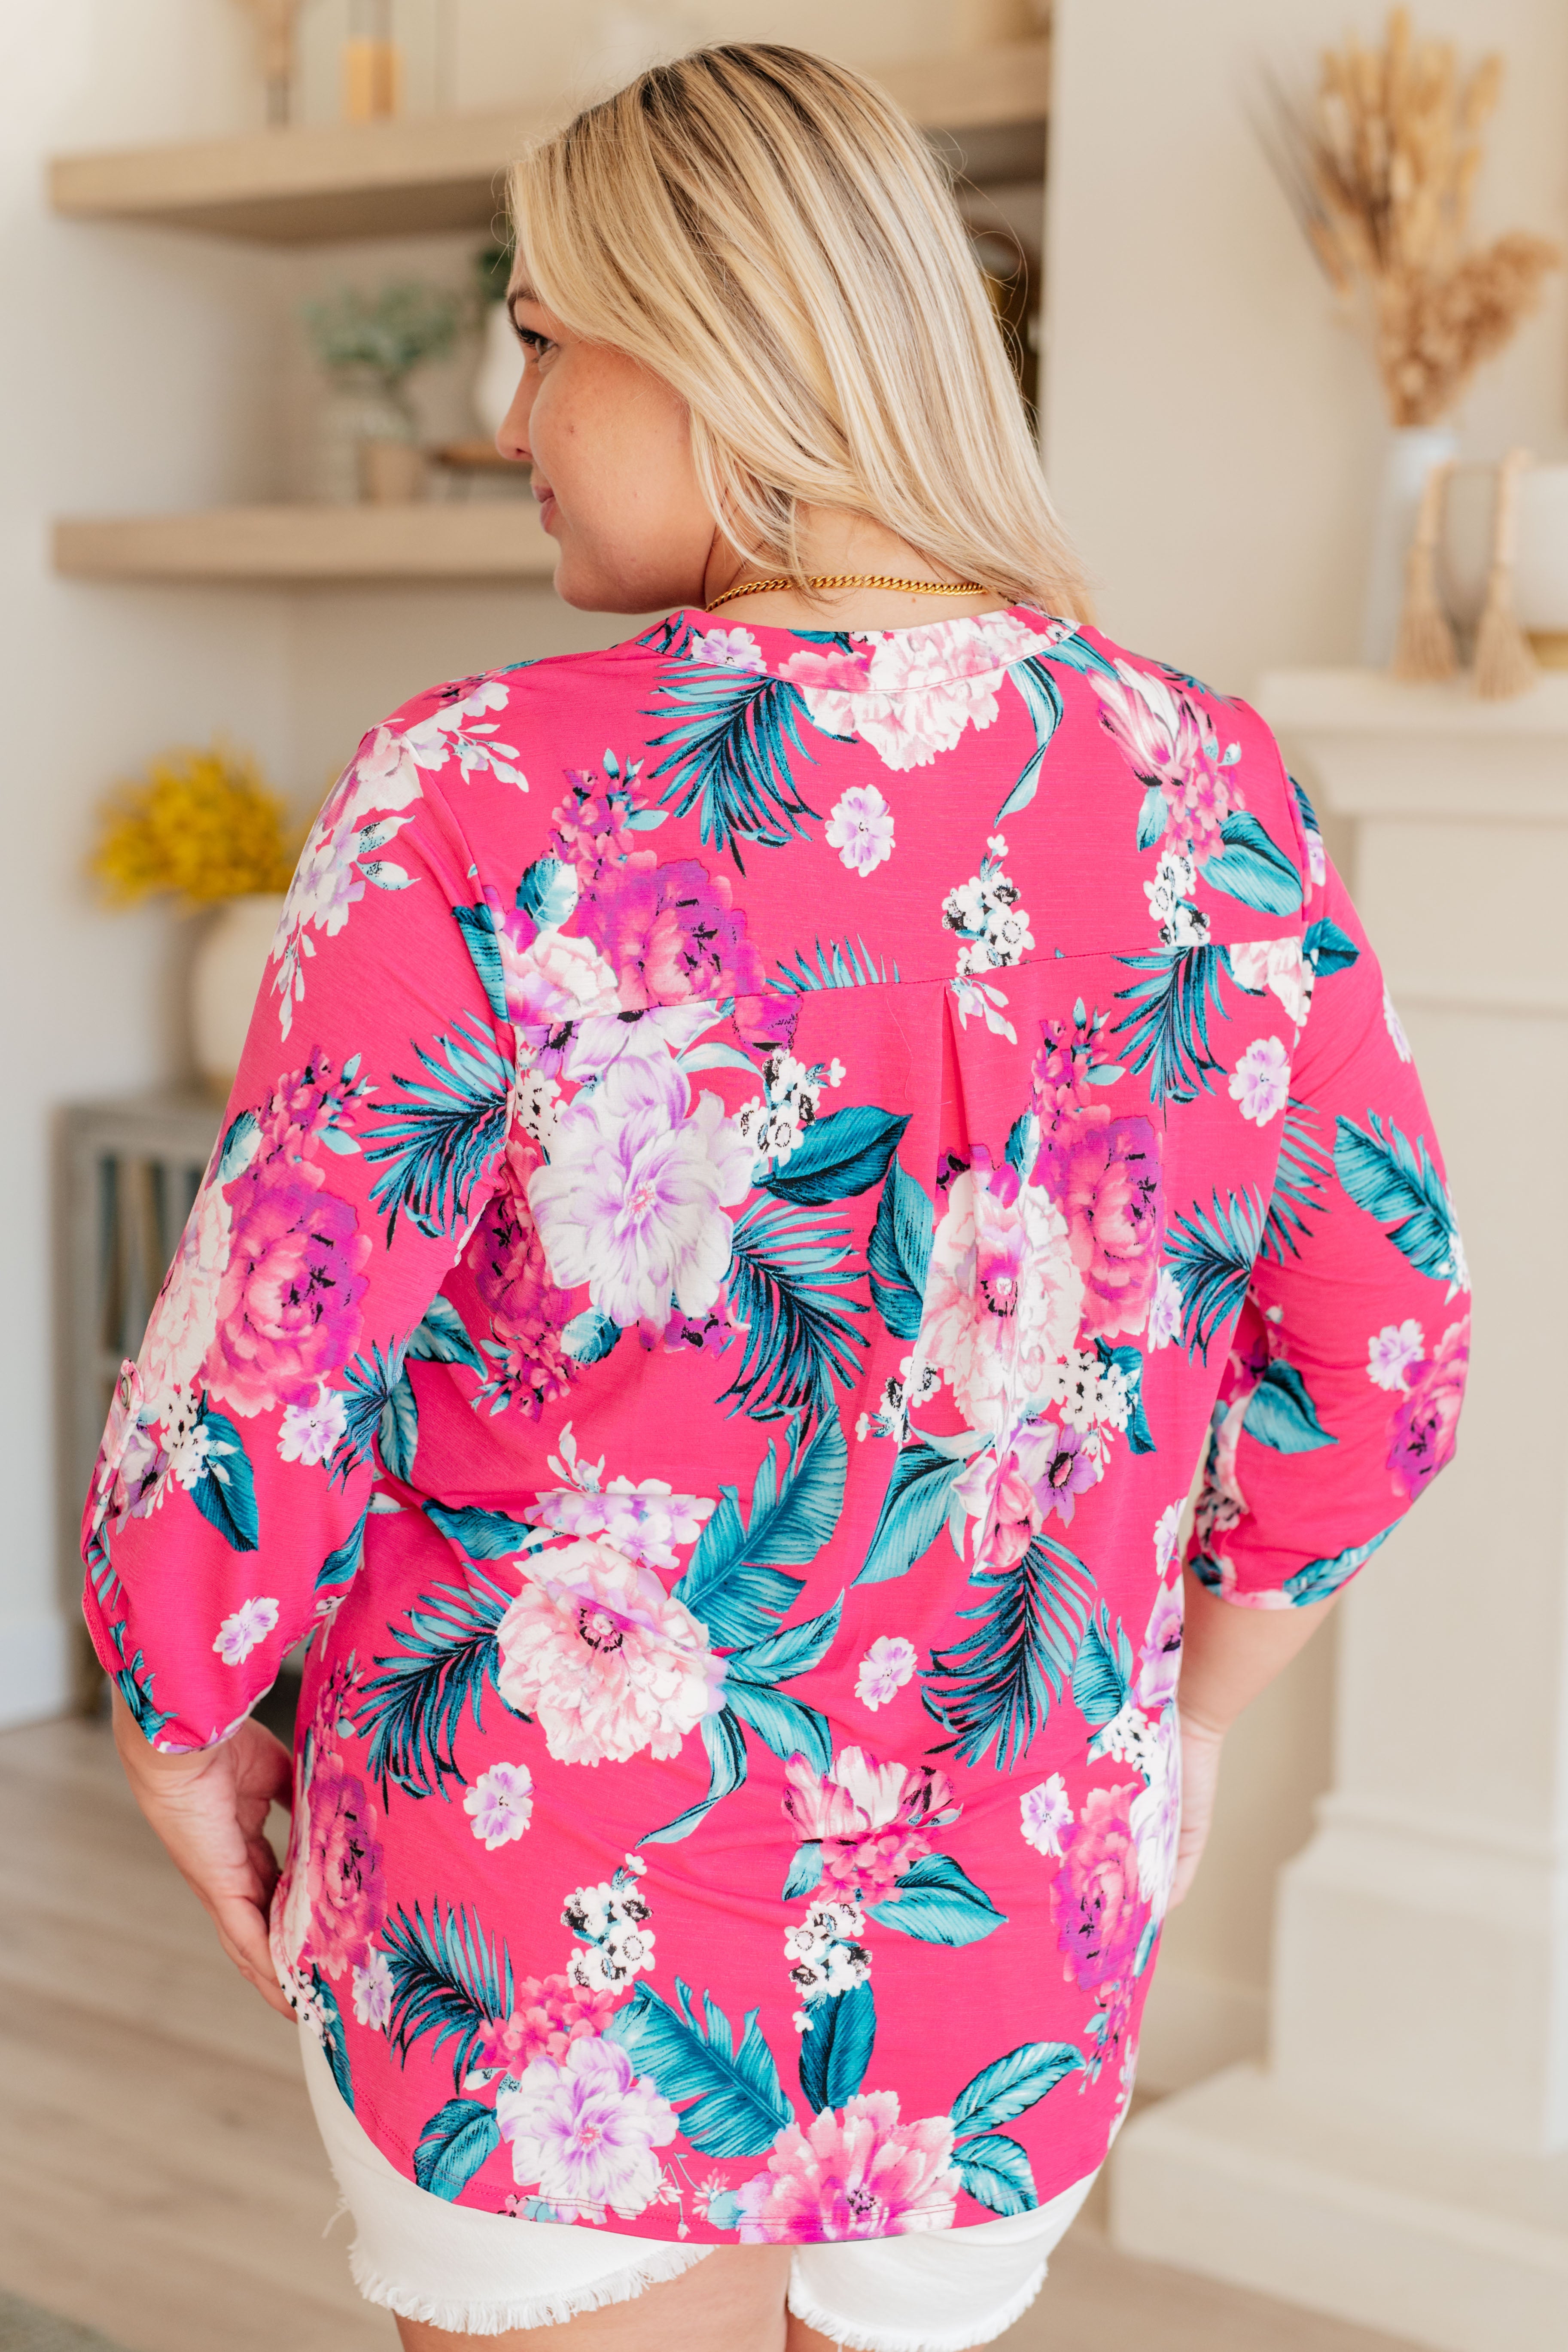 Dear Scarlett Lizzy Top in Magenta and Teal Tropical Floral Ave Shops